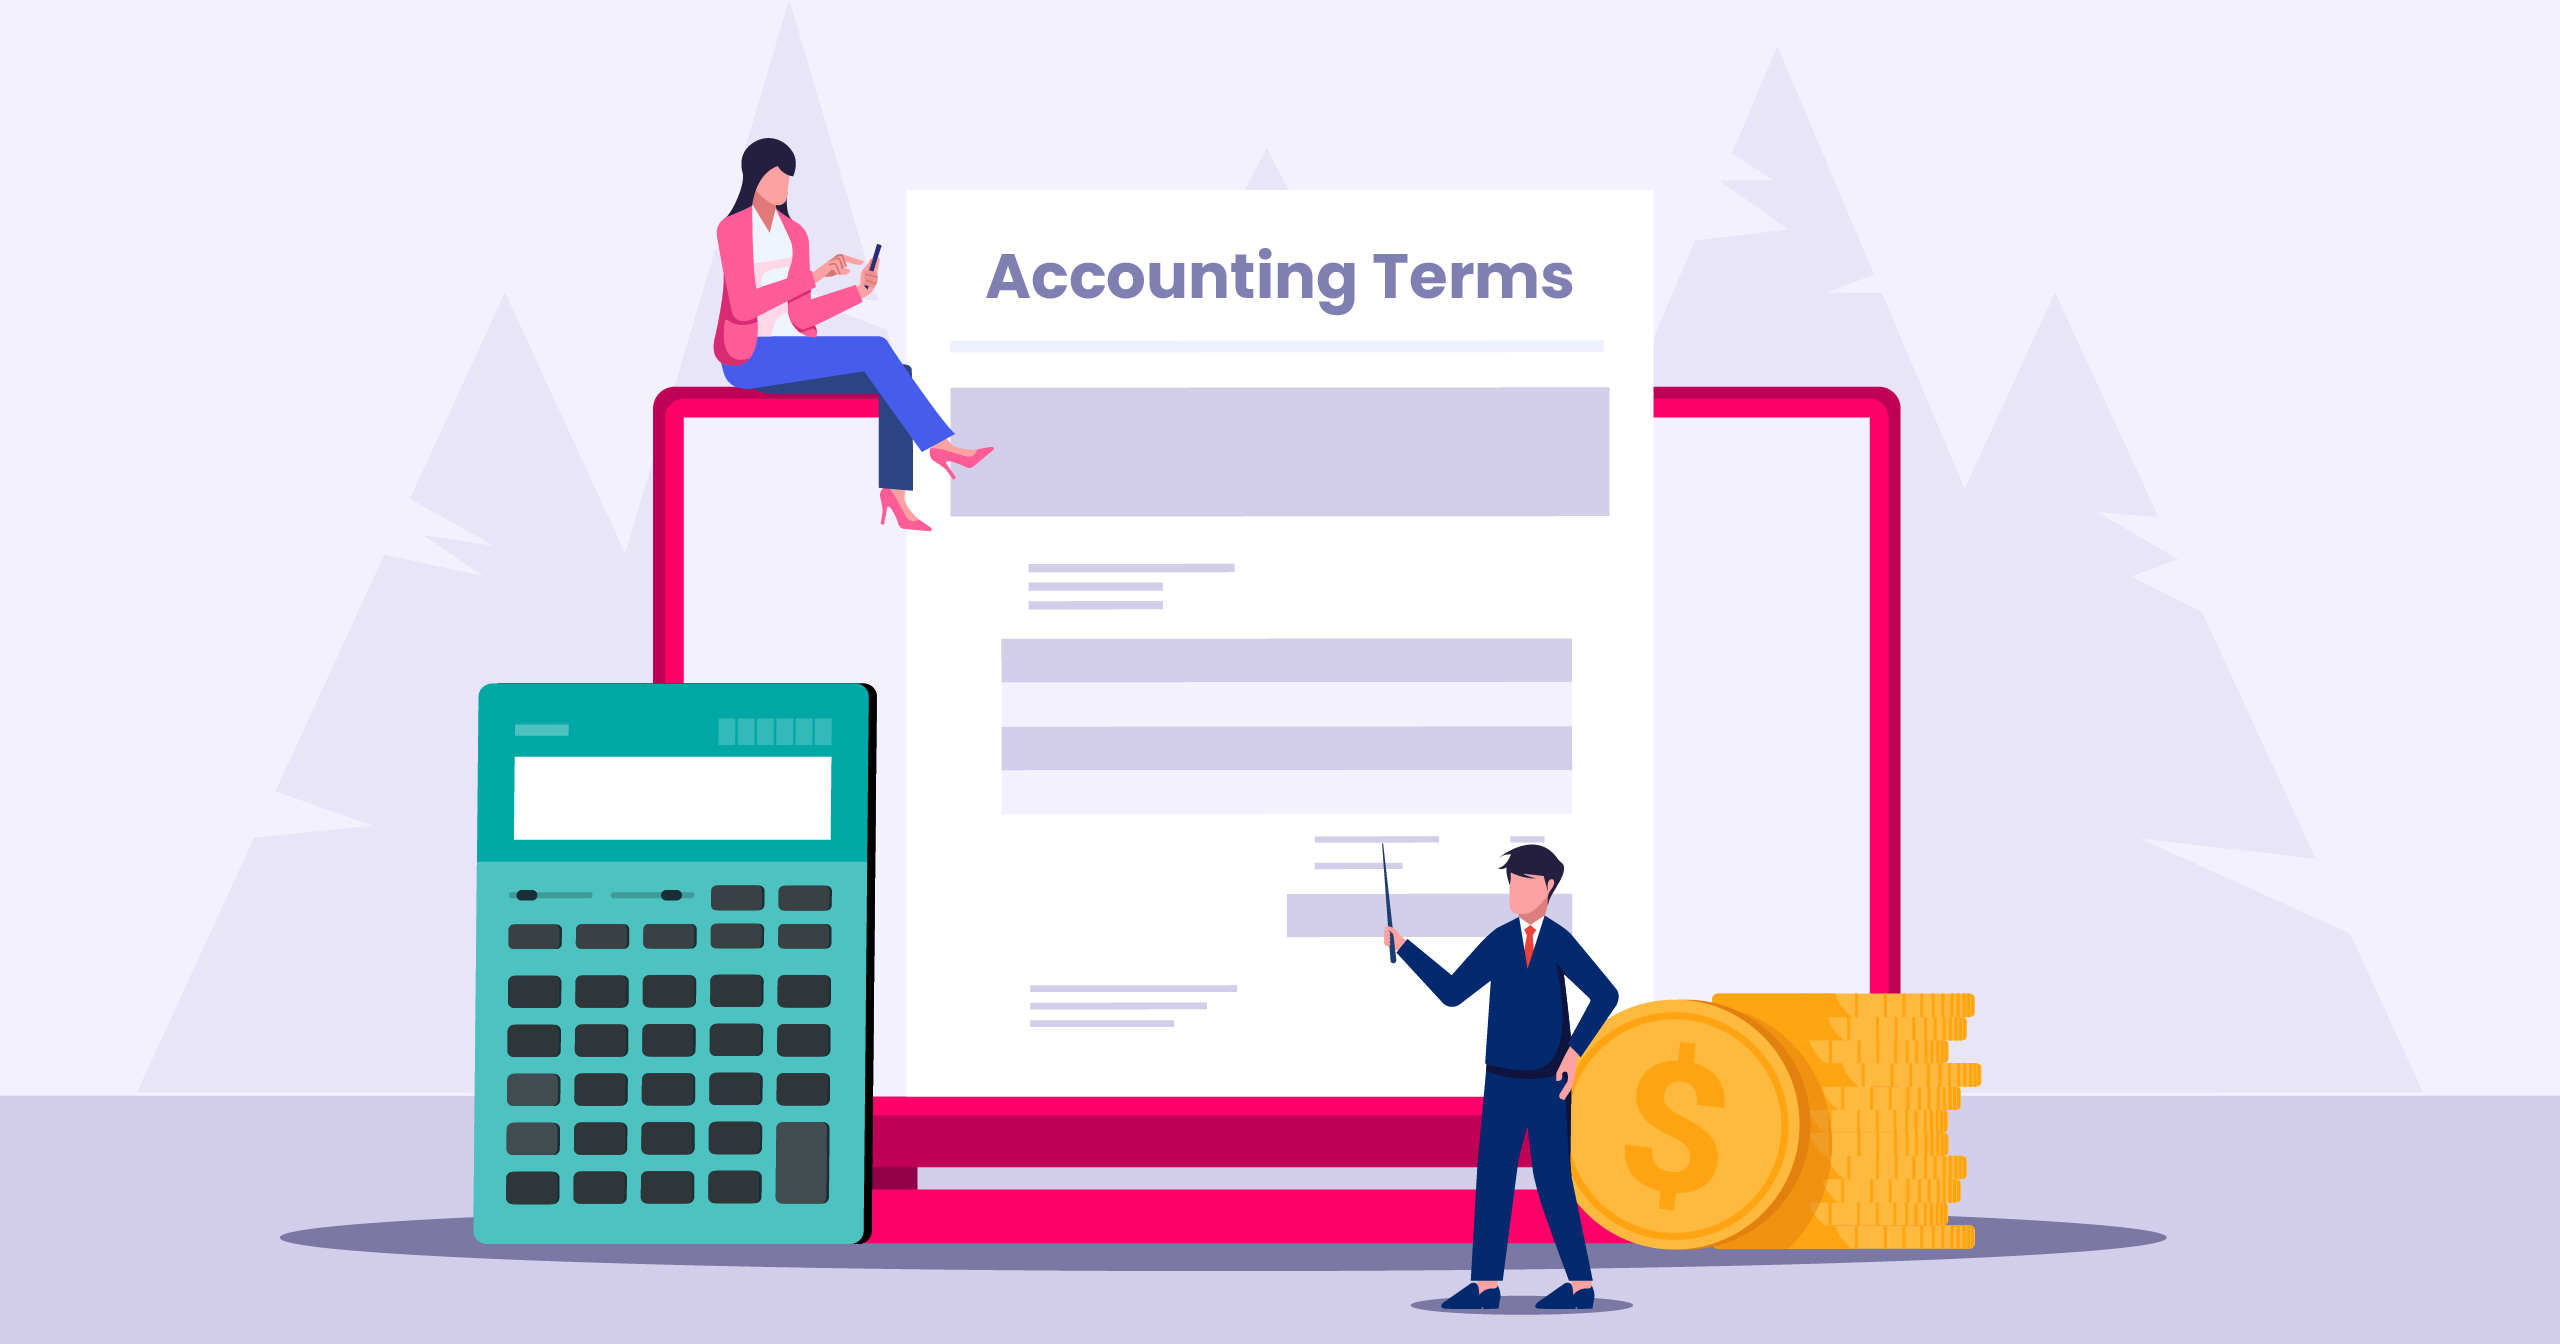 15 Important Accounting Terms Every Startup Founder Should Know